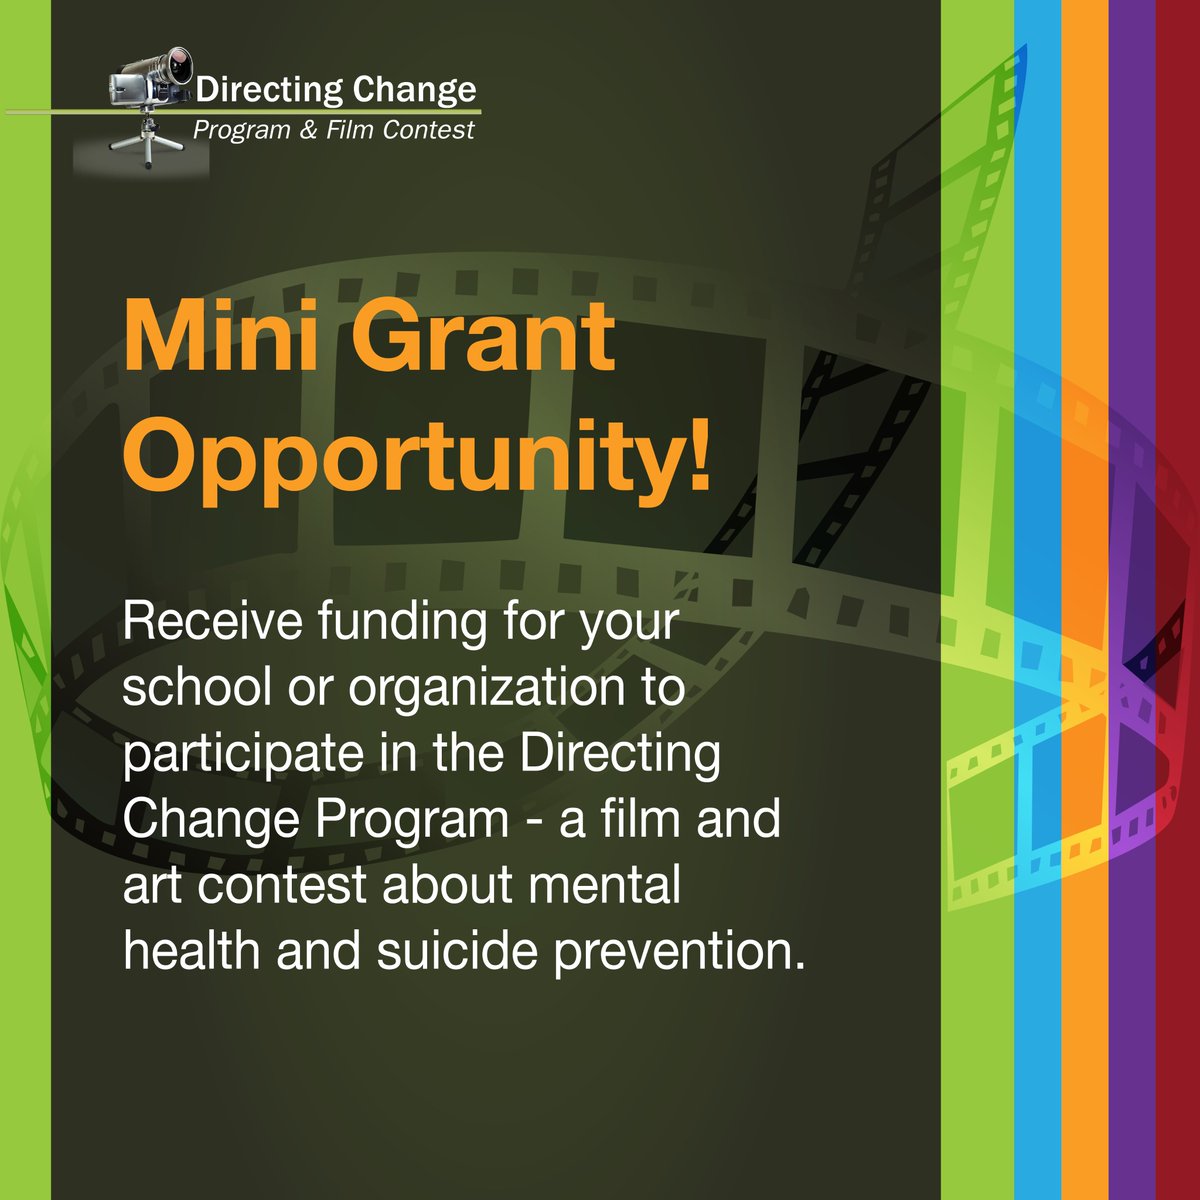 Don’t forget to apply for our 2023 Mini Grant by September 16th! Middle school, high school, and college classes as well as organizations and youth clubs eligible. Apply here: directingchangeca.org/2023-directing… #funding #Californiayouth #schools #filmcontest #artfunding